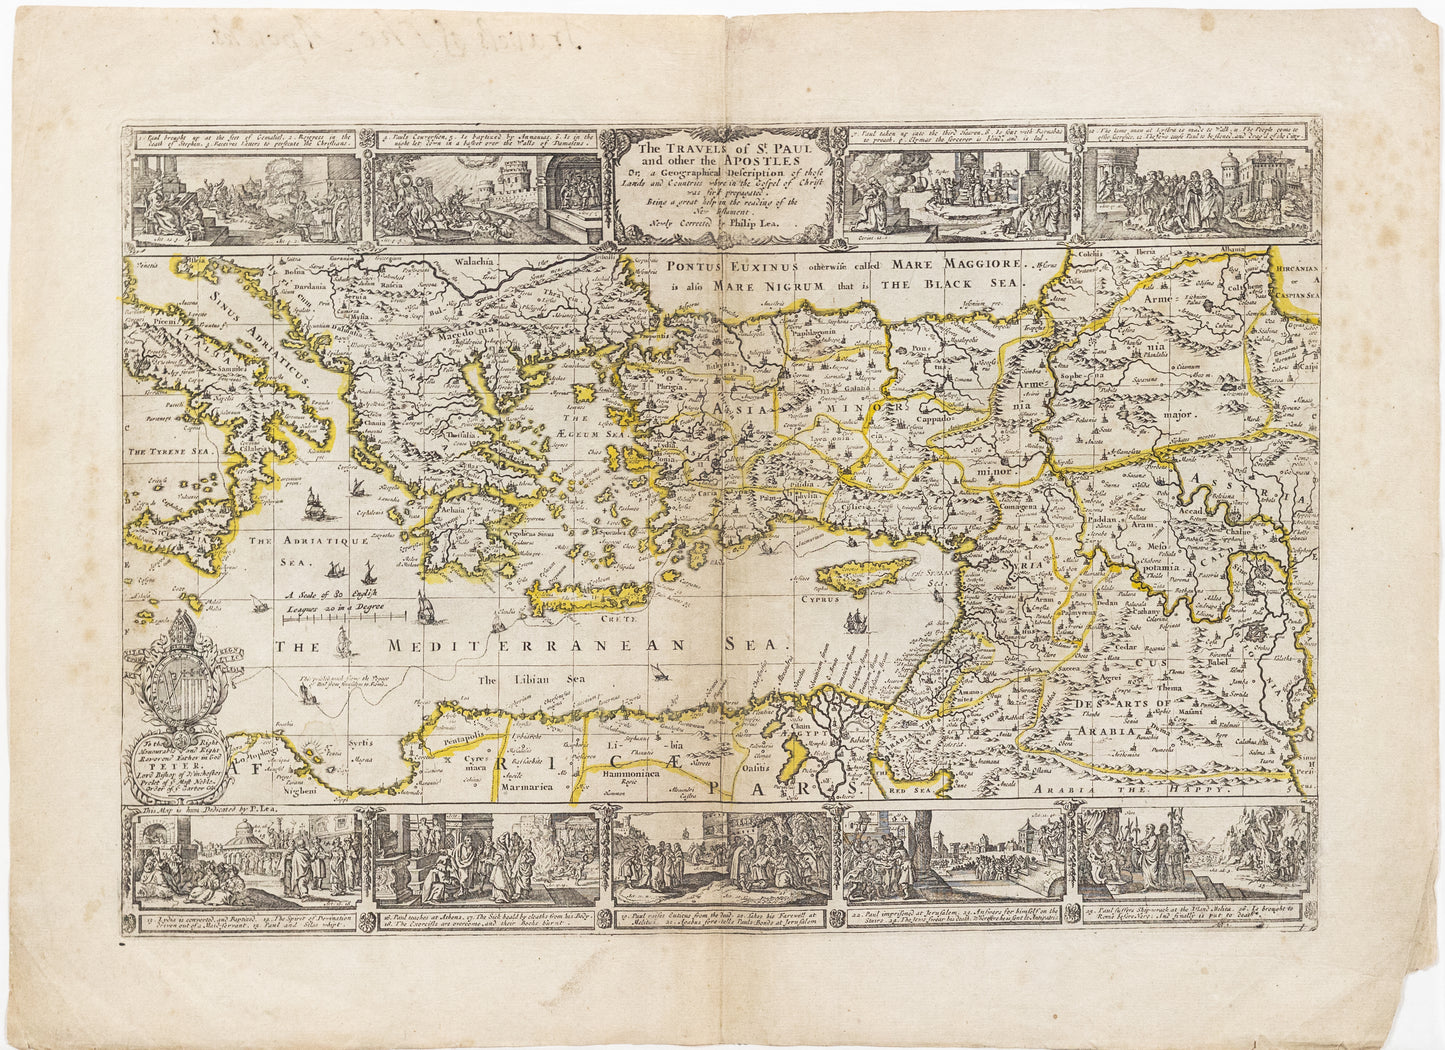 Lea, Philip. The Travels of St. Paul and other the Apostles. London: 18th c.